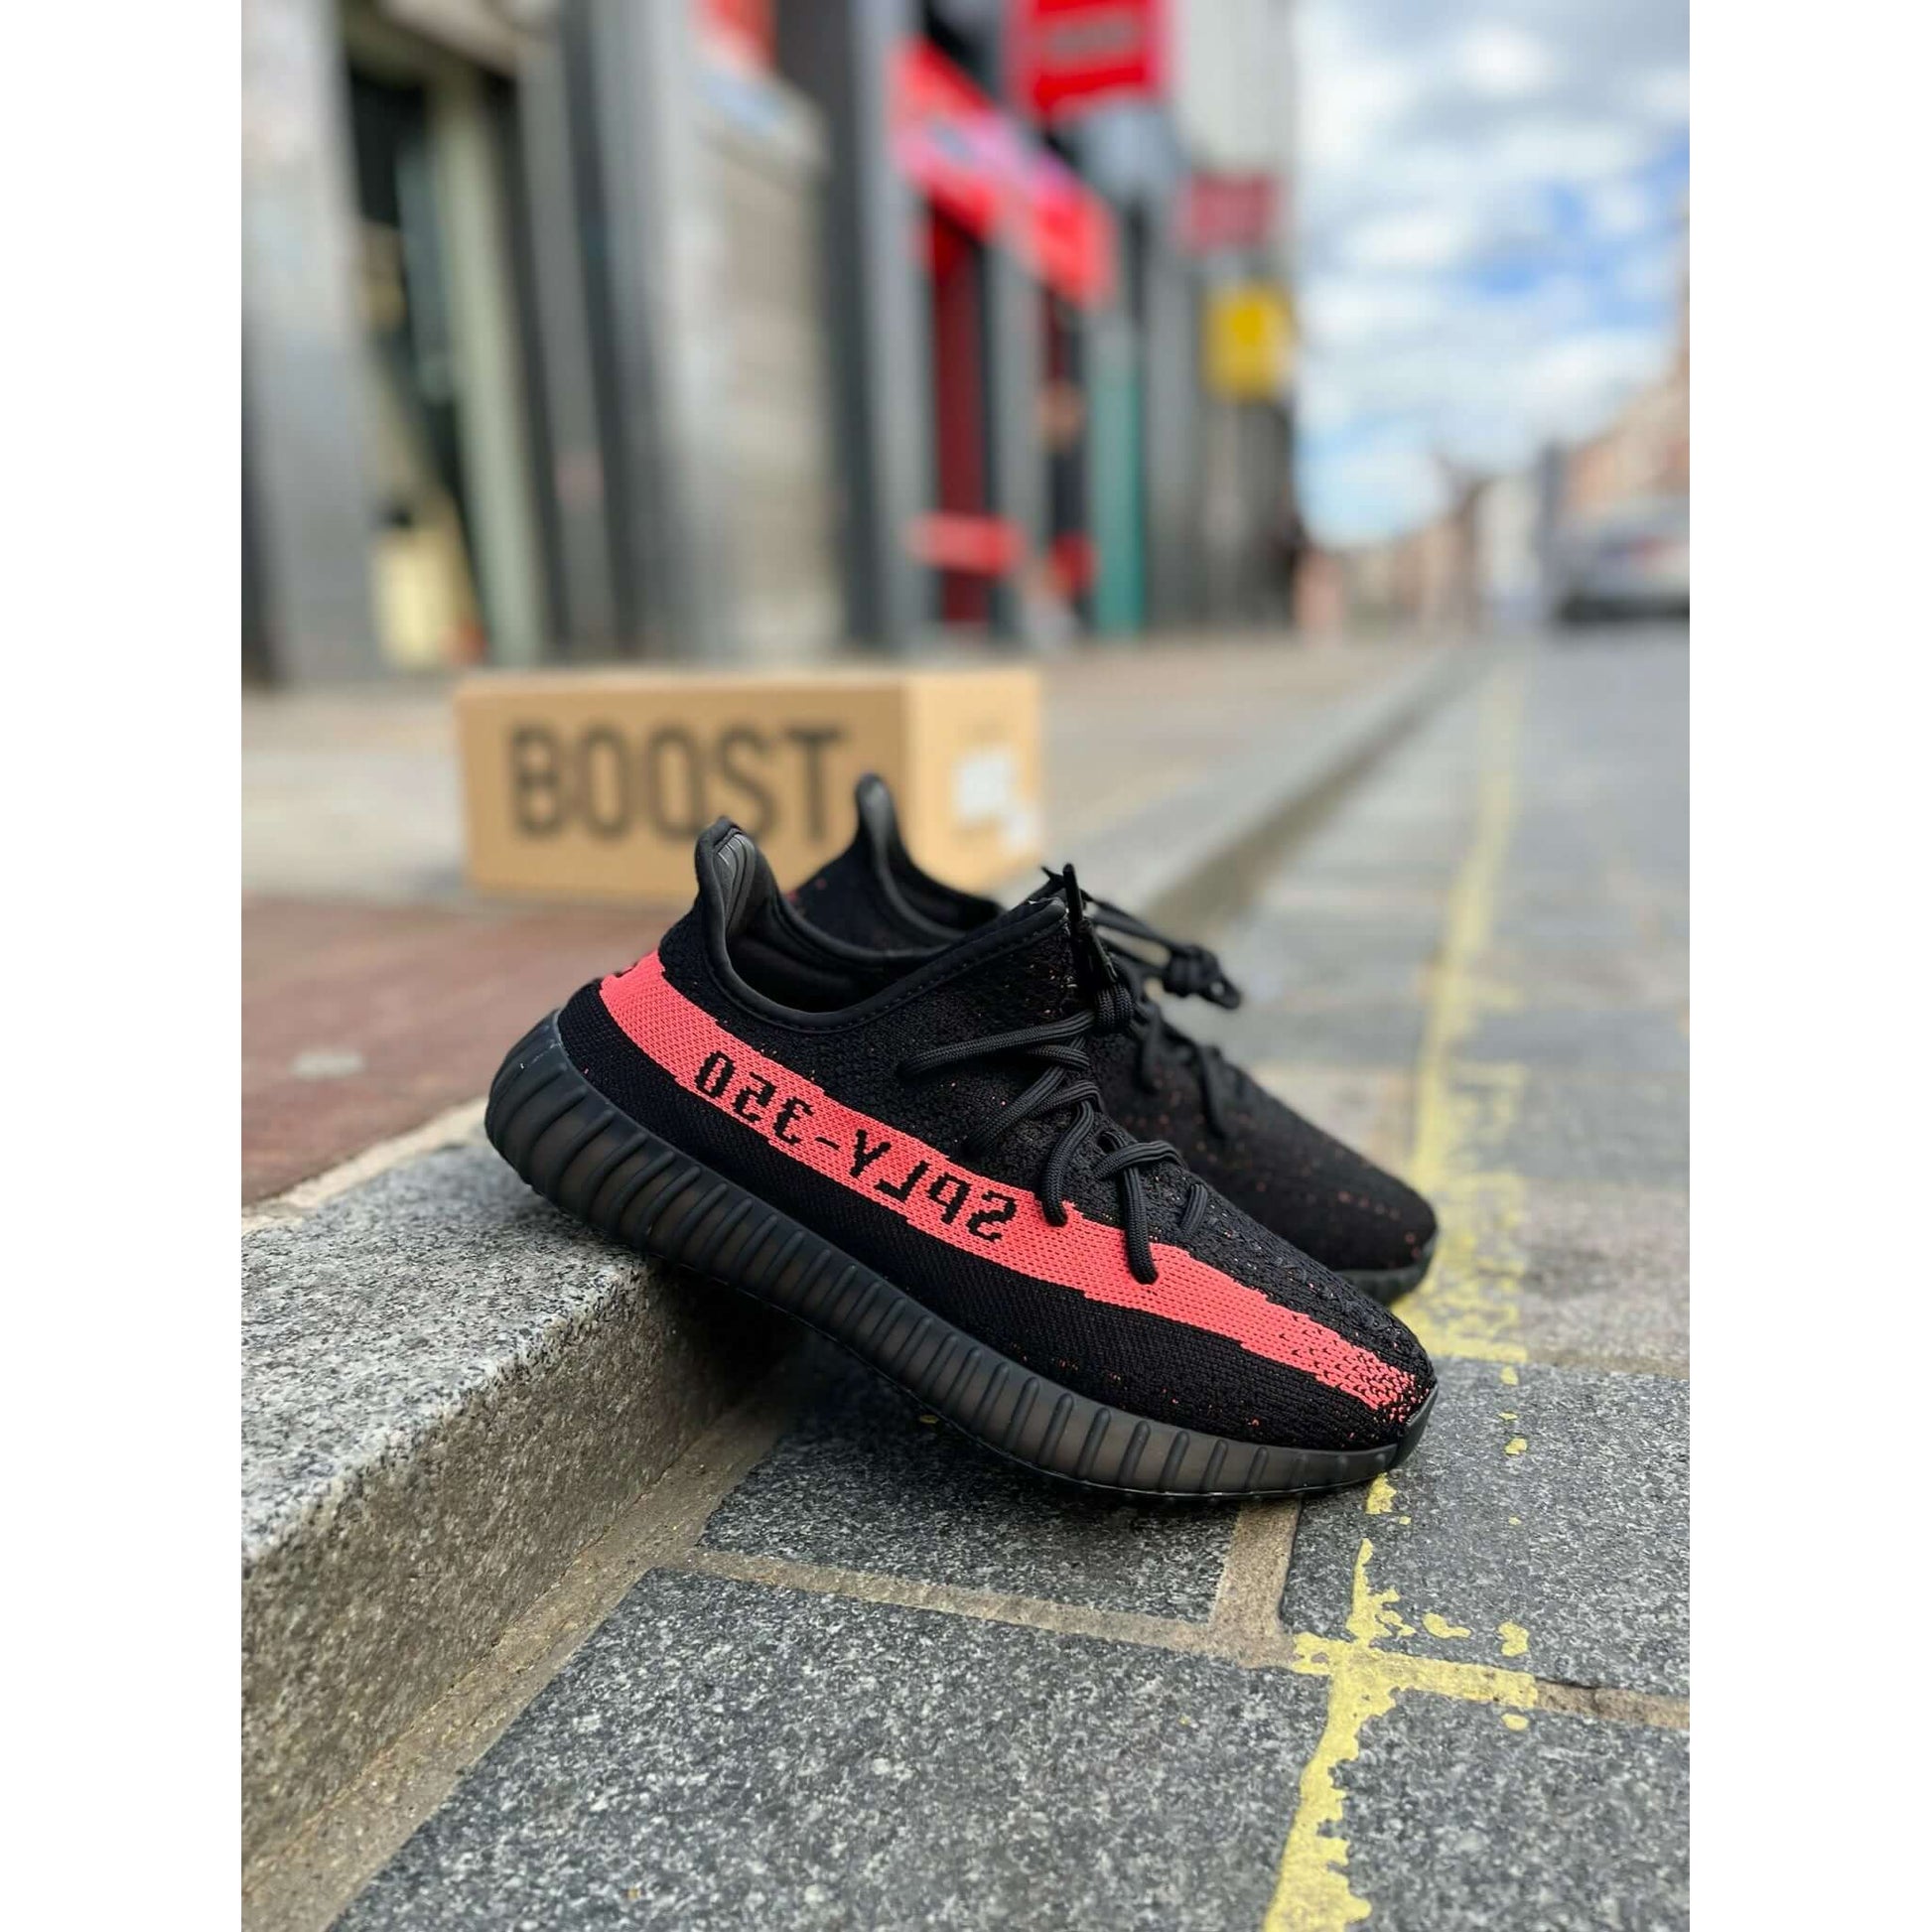 adidas Yeezy Boost 350 V2 Core Black Red (2022) by Yeezy from £248.00